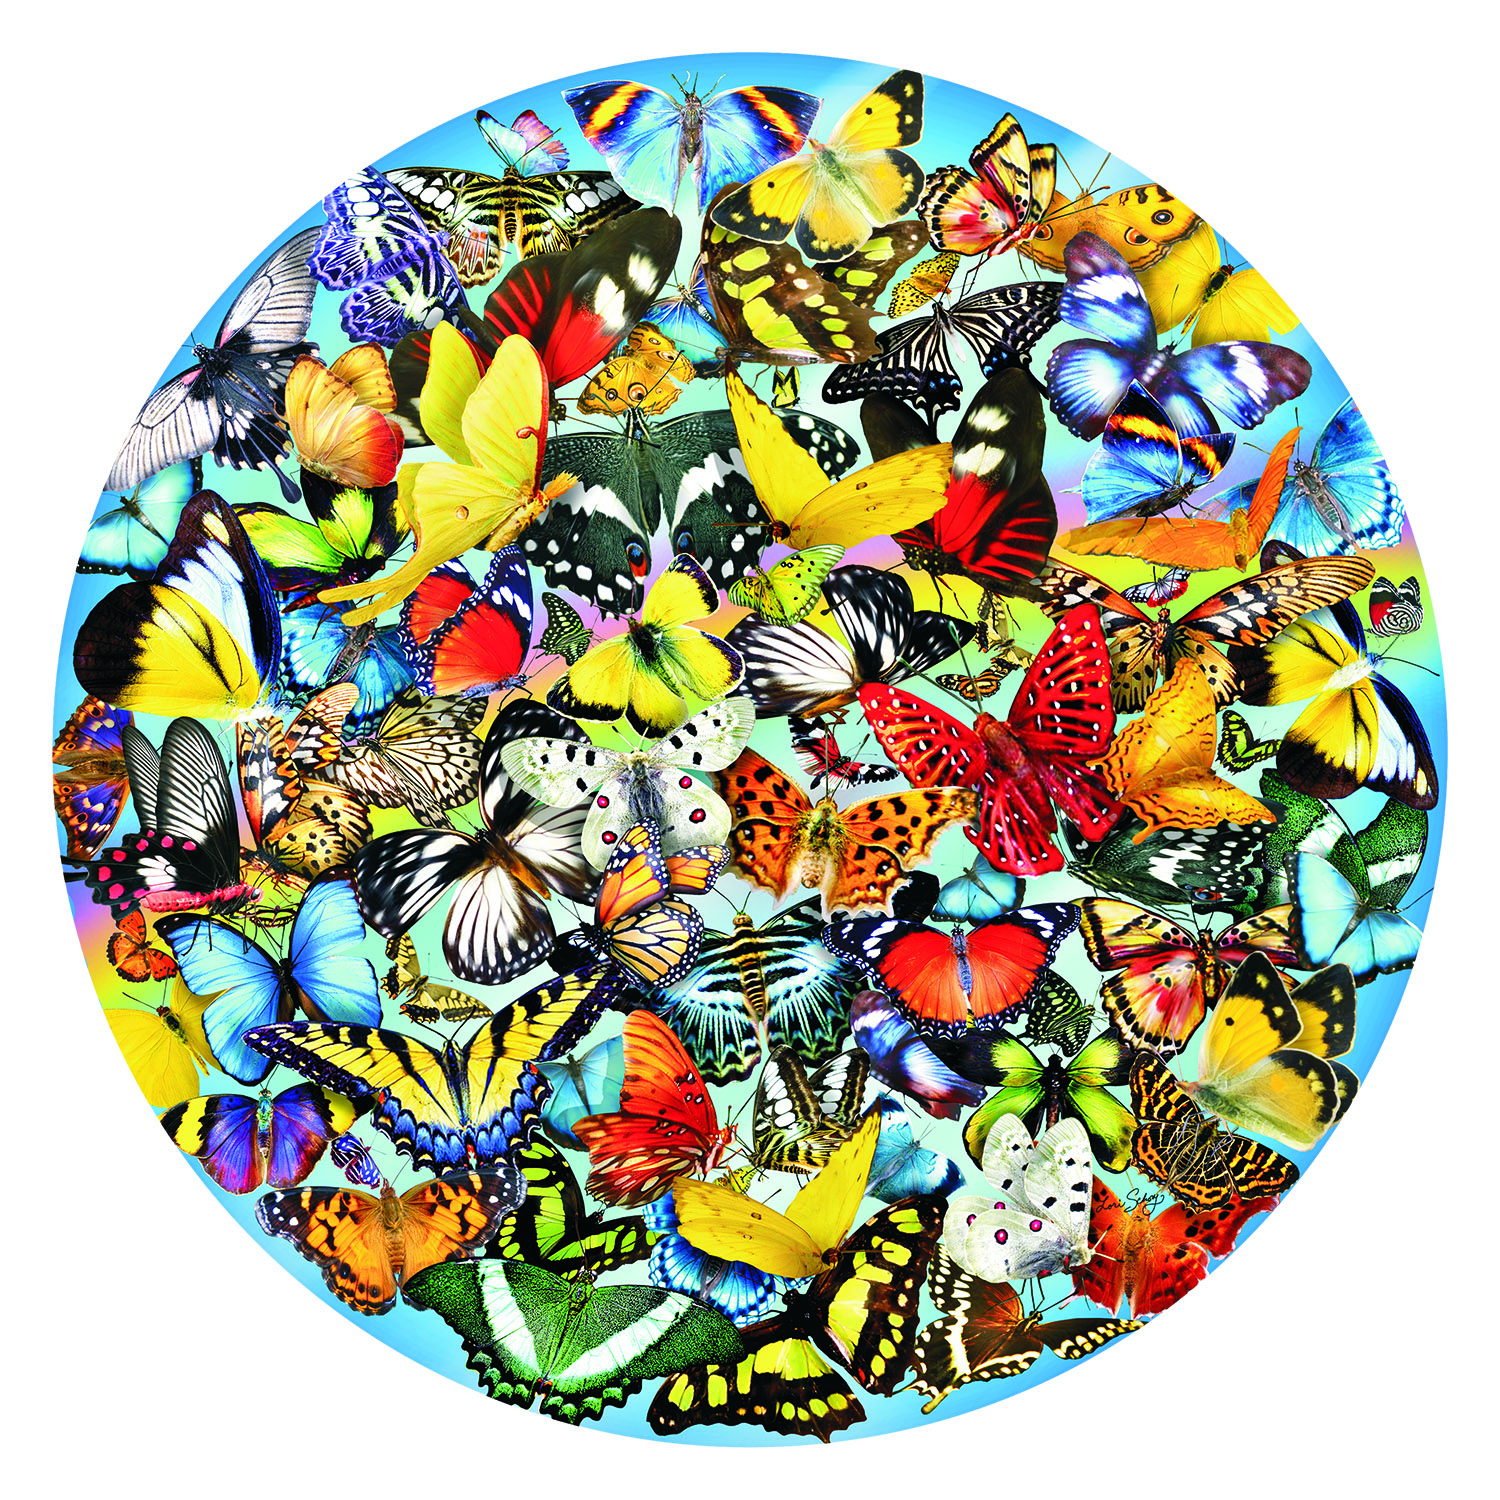 Butterflies in the Round